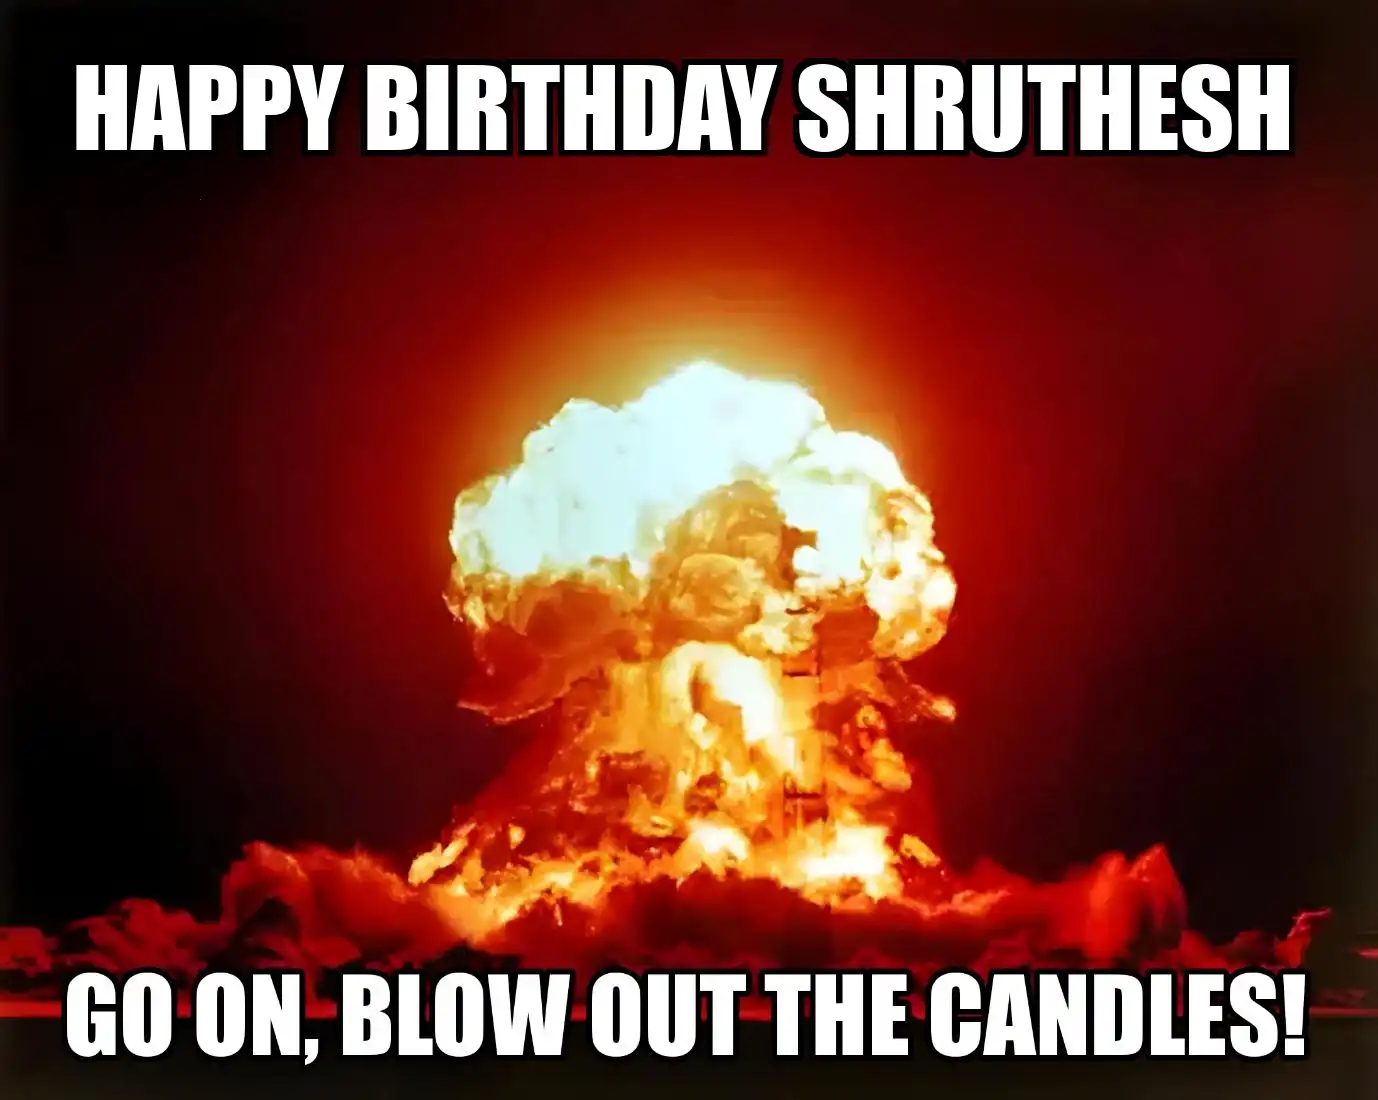 Happy Birthday Shruthesh Go On Blow Out The Candles Meme